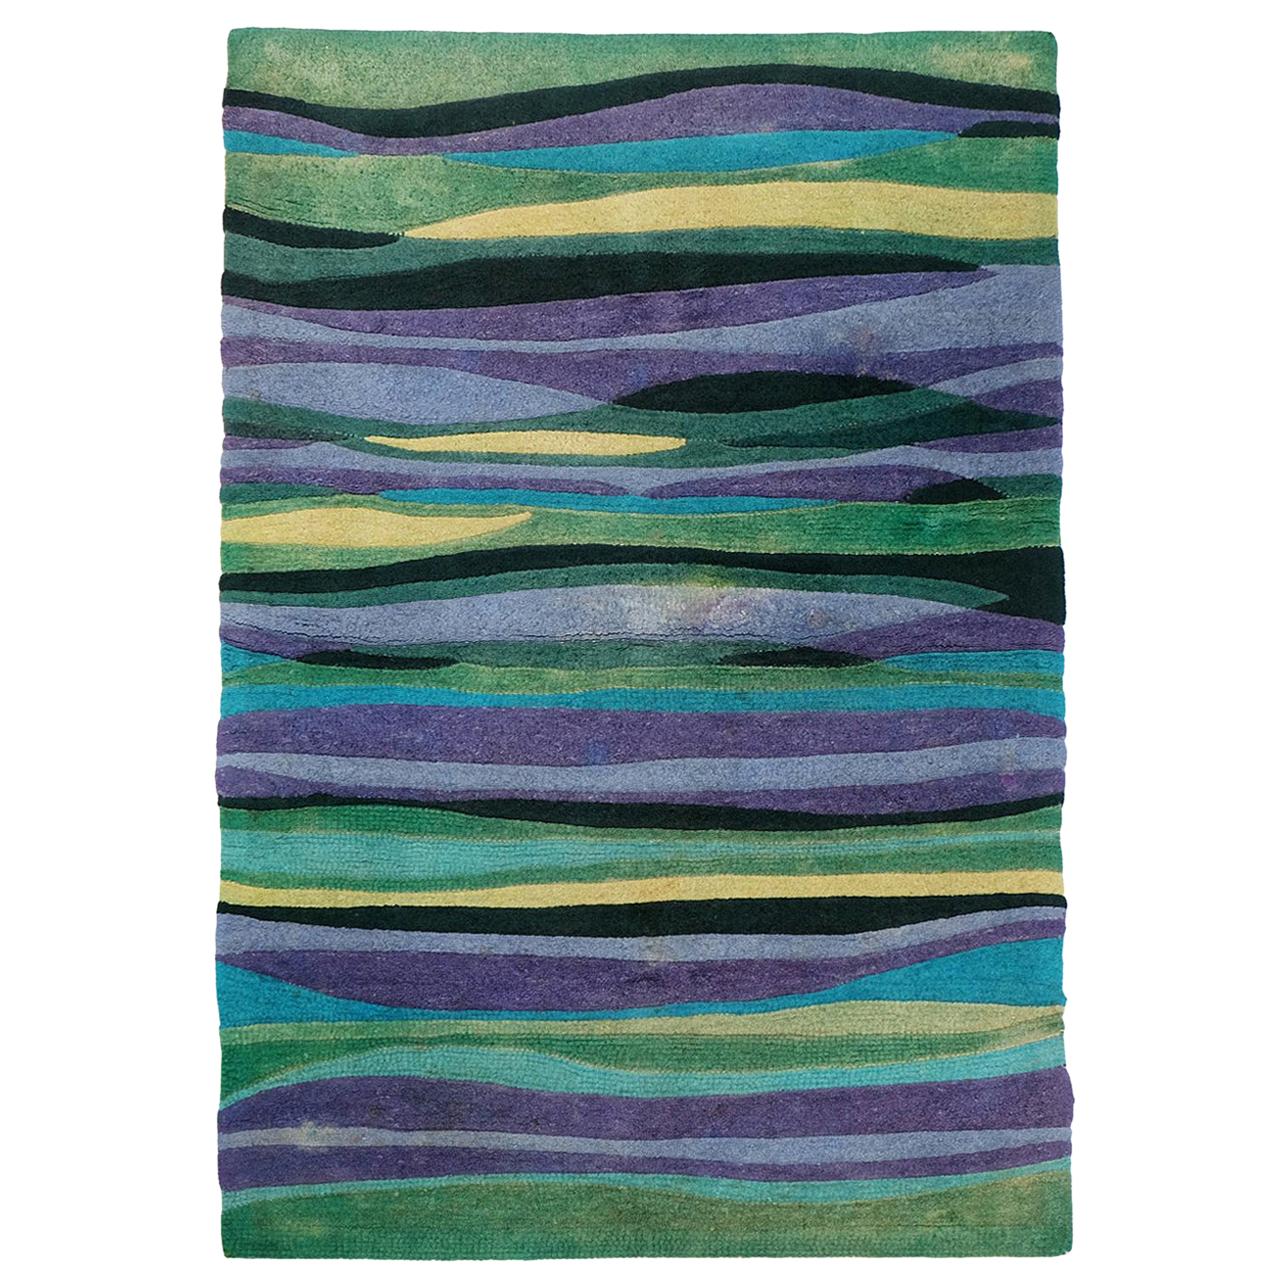 1960s Abstract Wave Rug by V'Soske Wall Art Decoration